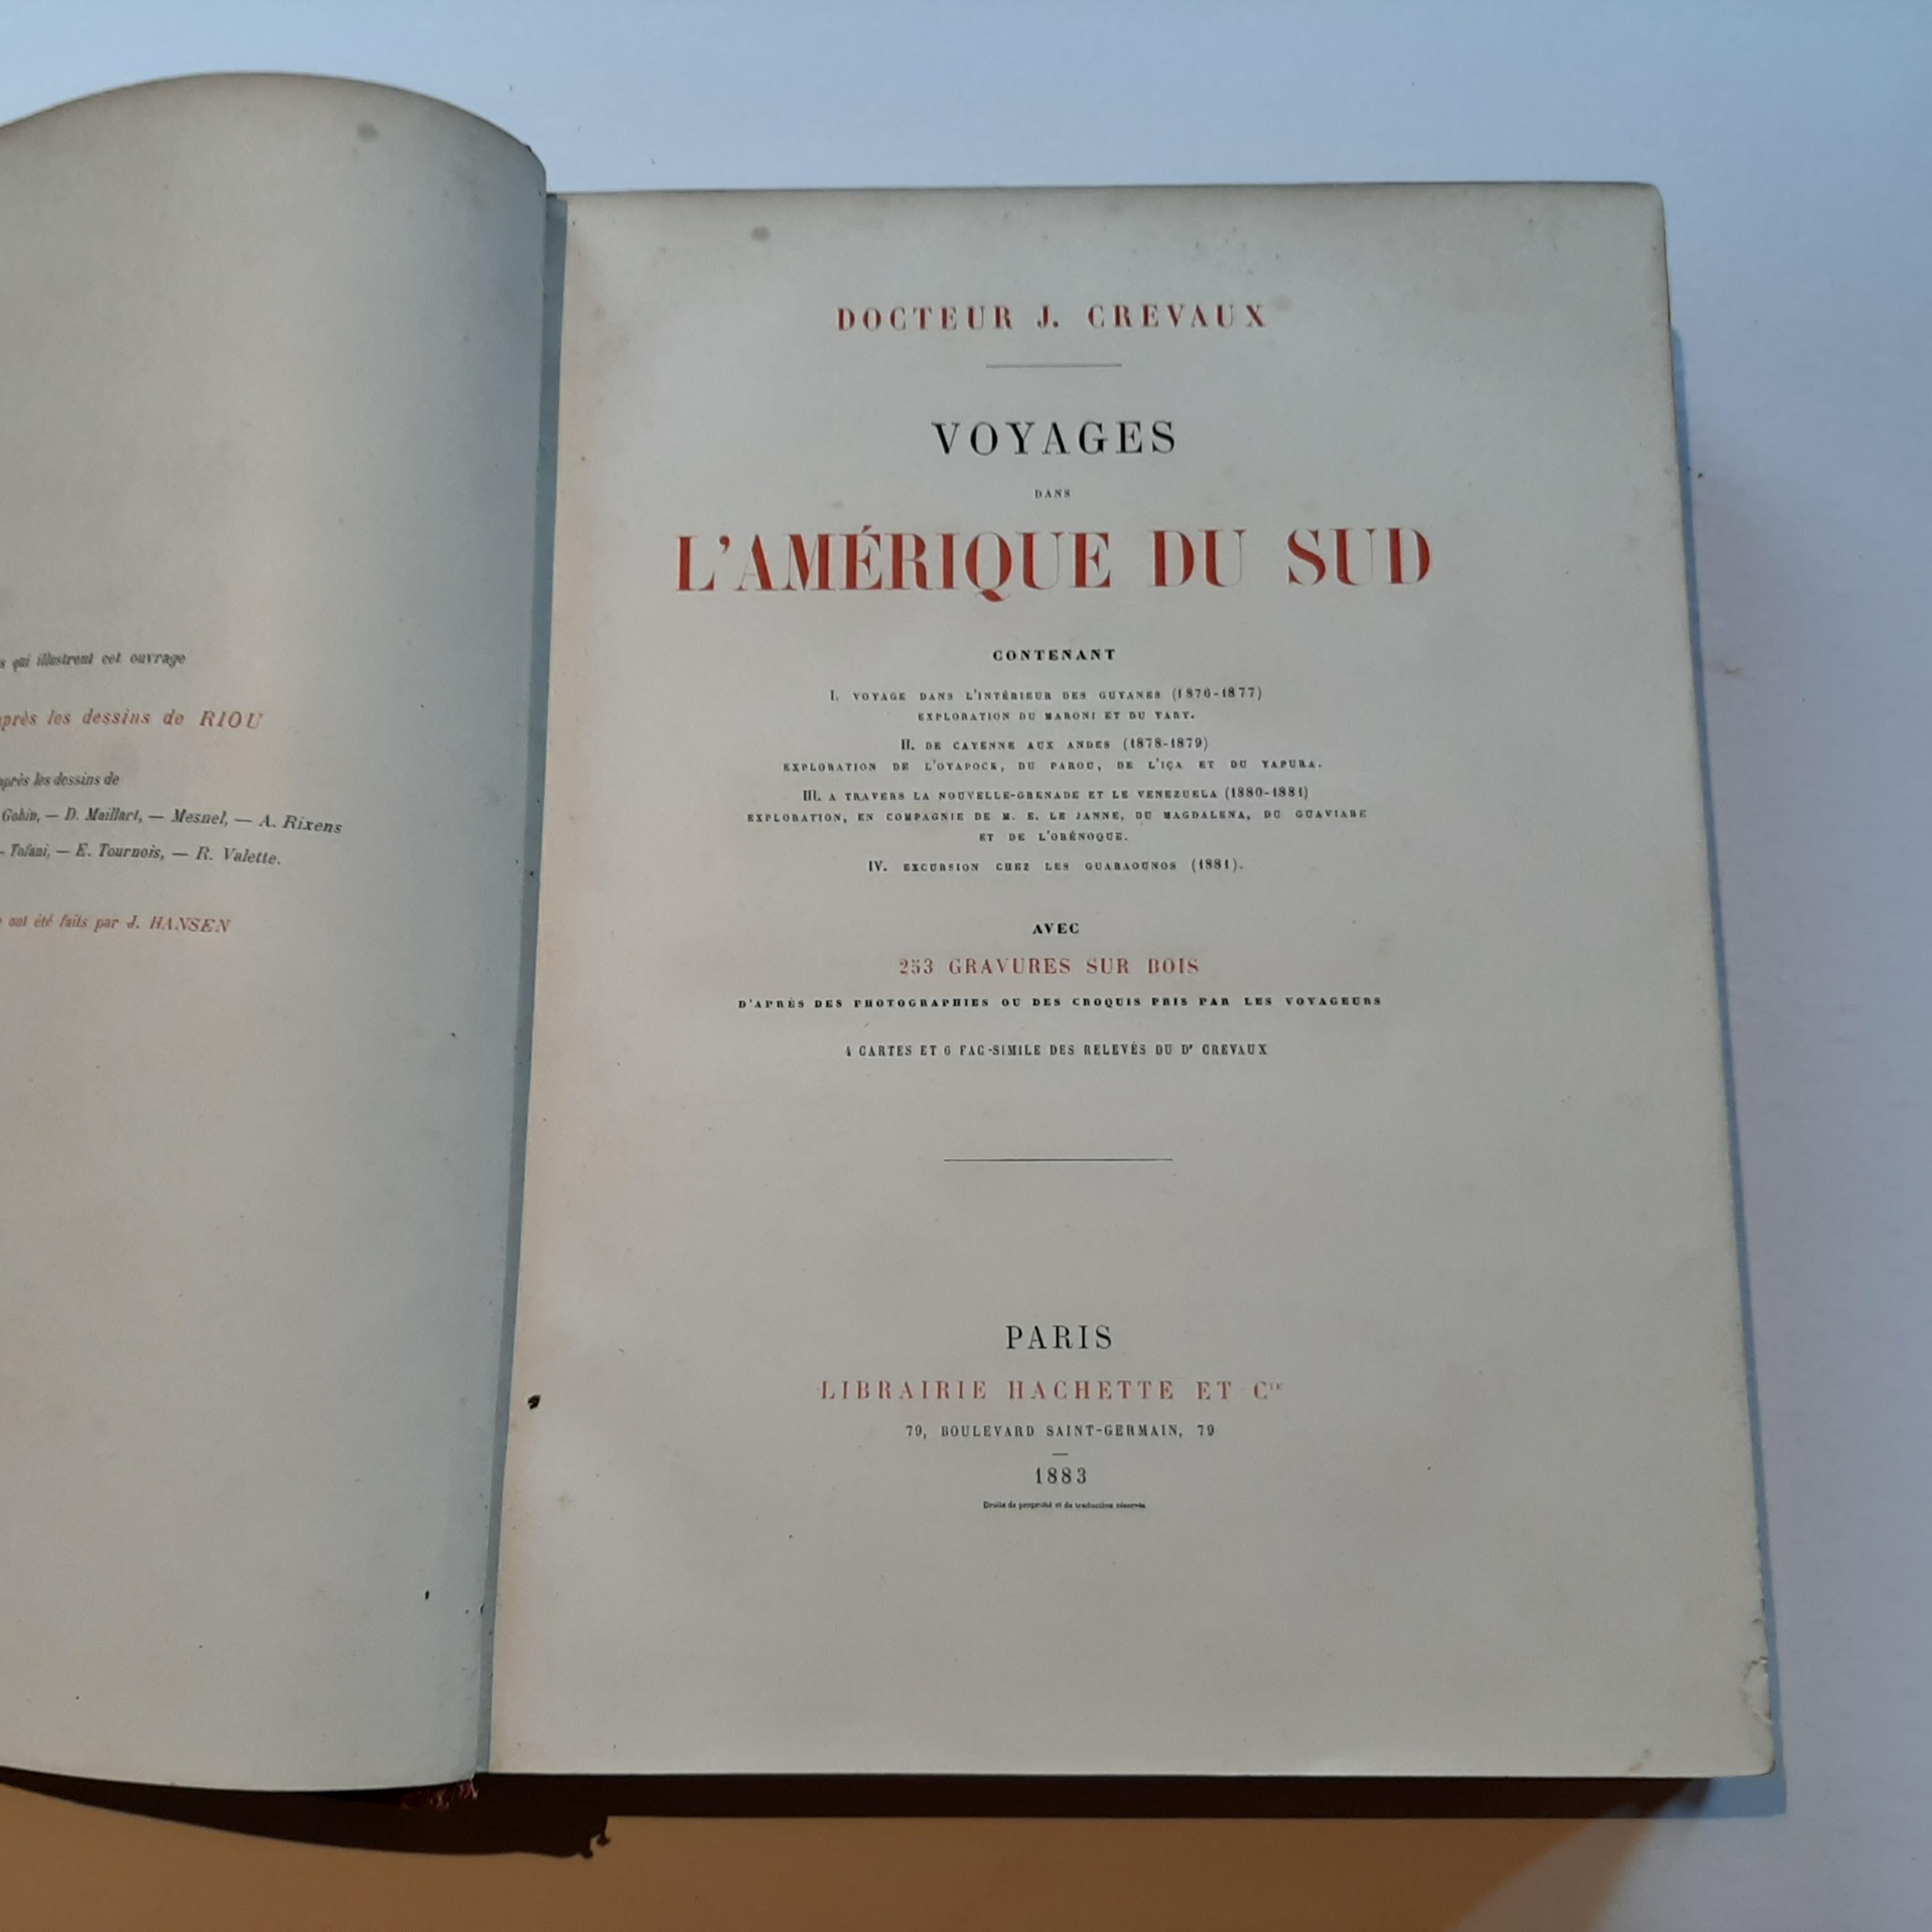 Voyages dans l'Amérique du Sud by J. Creavaux. Jules Crevaux was a French doctor, soldier, and explorer. He is known for his multiple explorations into the interior of French Guiana and the Amazon. Contains: Voyage dans l'intérieur des Guyanes